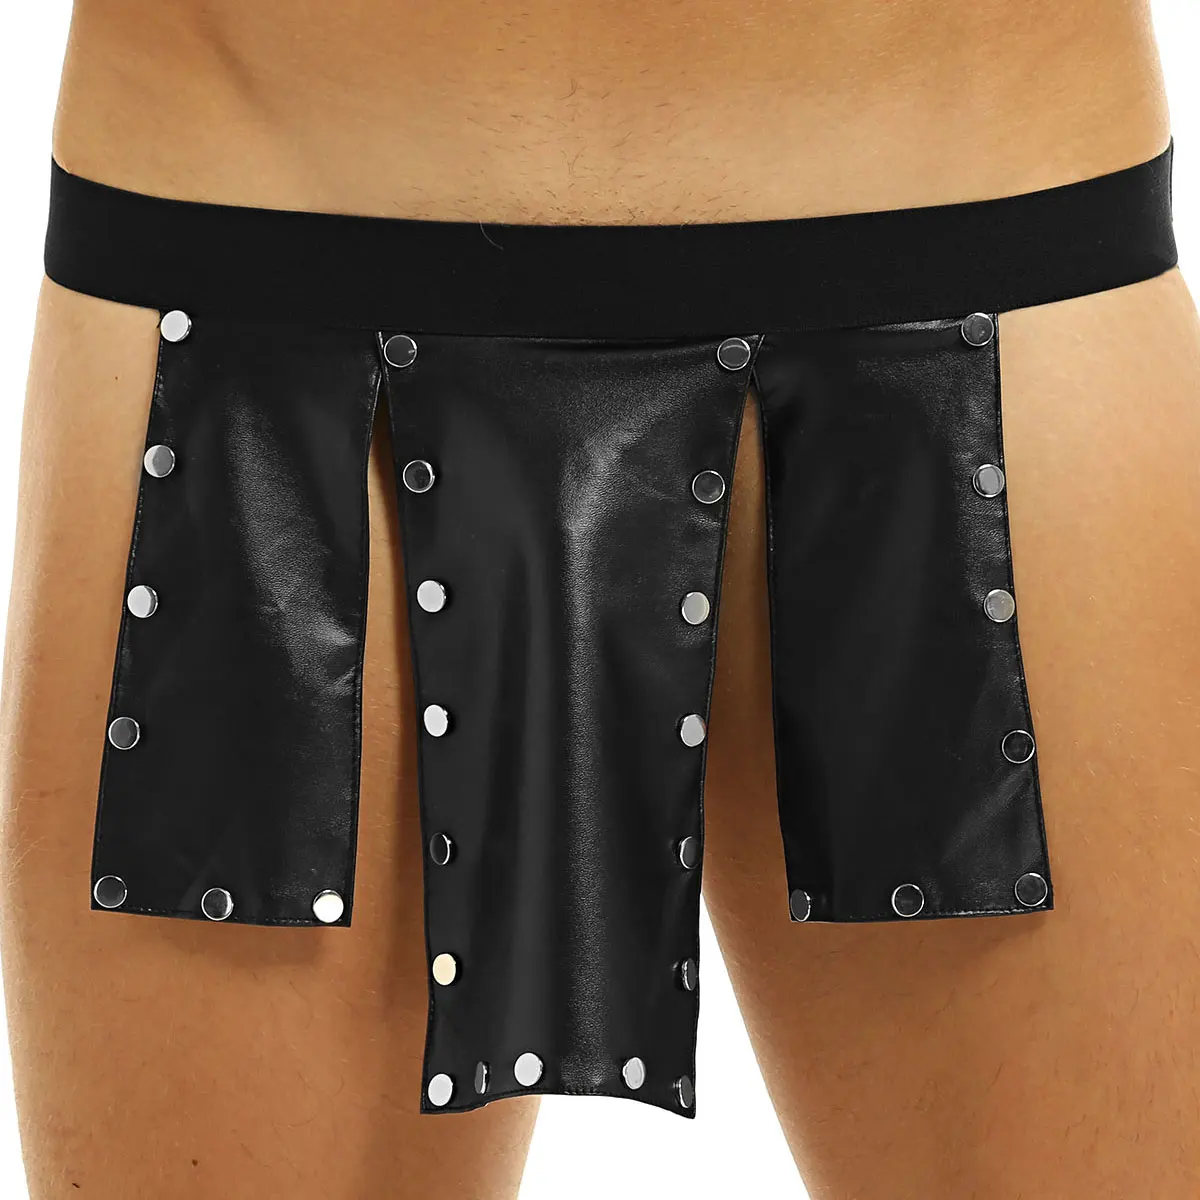 

Mens Sexy Lingerie Low Rise Faux Leather Soft Novelty Metal Studded Kilt Underwear Skirt Adult Clubwear Rave Party Costume Hot